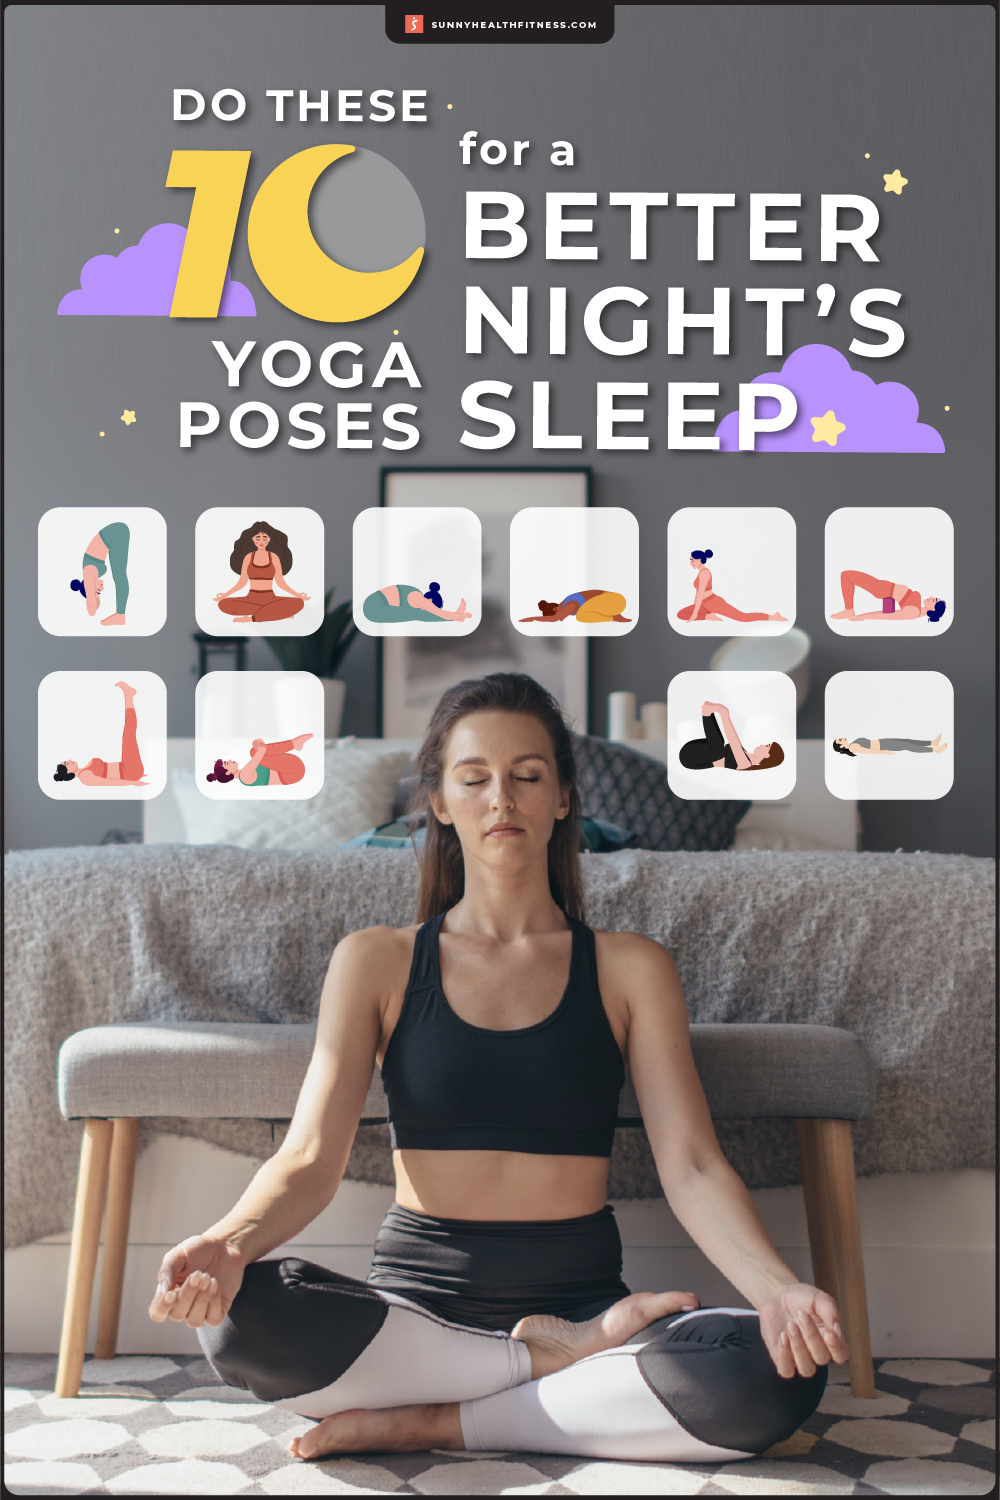 For the Love of Sleep: 7 Bedtime Yoga Poses to Beat Insomnia